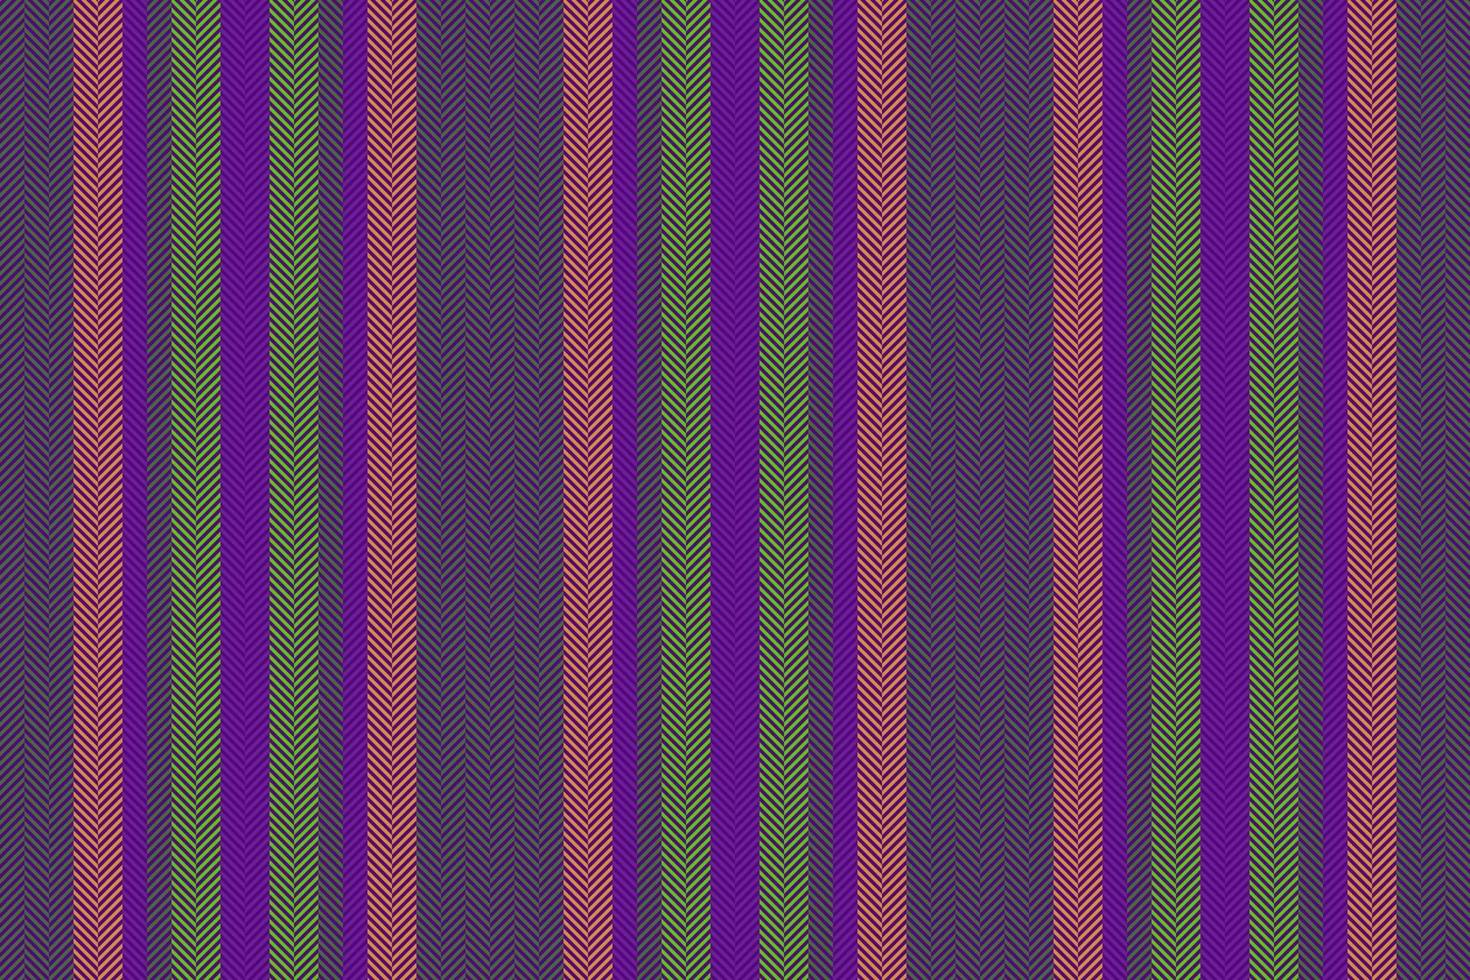 Vertical seamless texture. Textile stripe background. Fabric vector lines pattern.